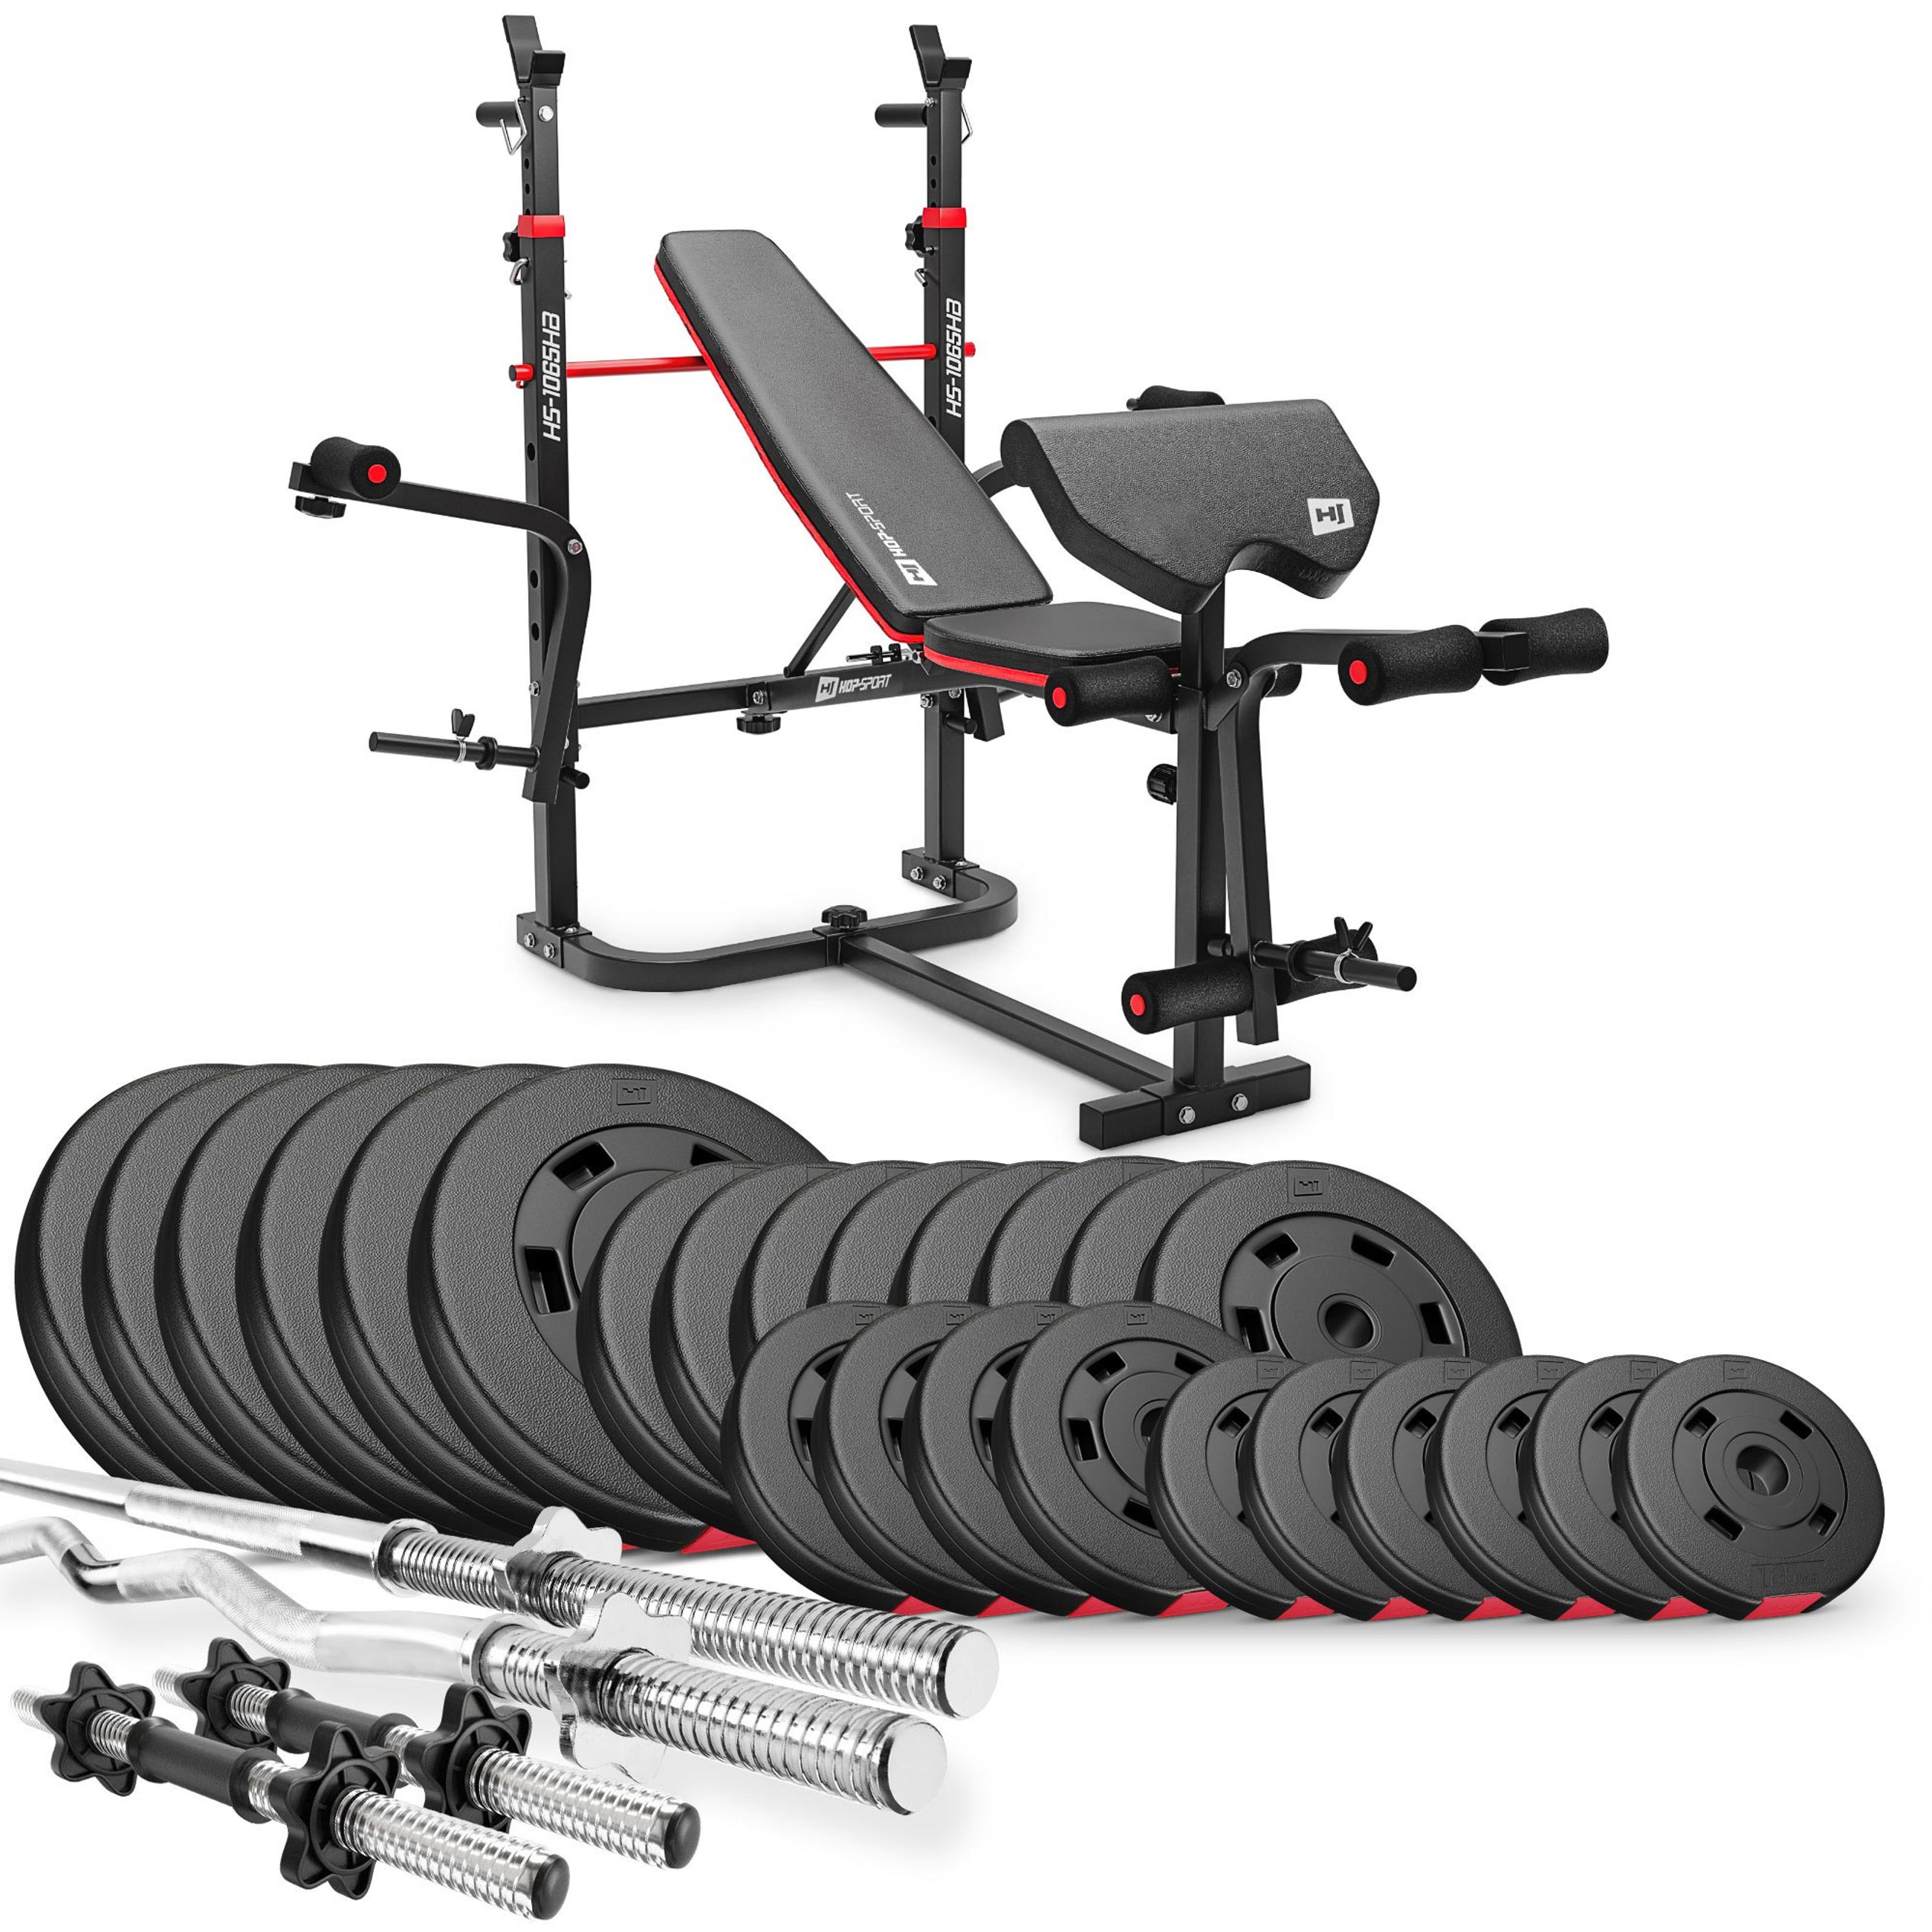 Premium 135 kg Barbell Set with HS-1065 Weight Bench